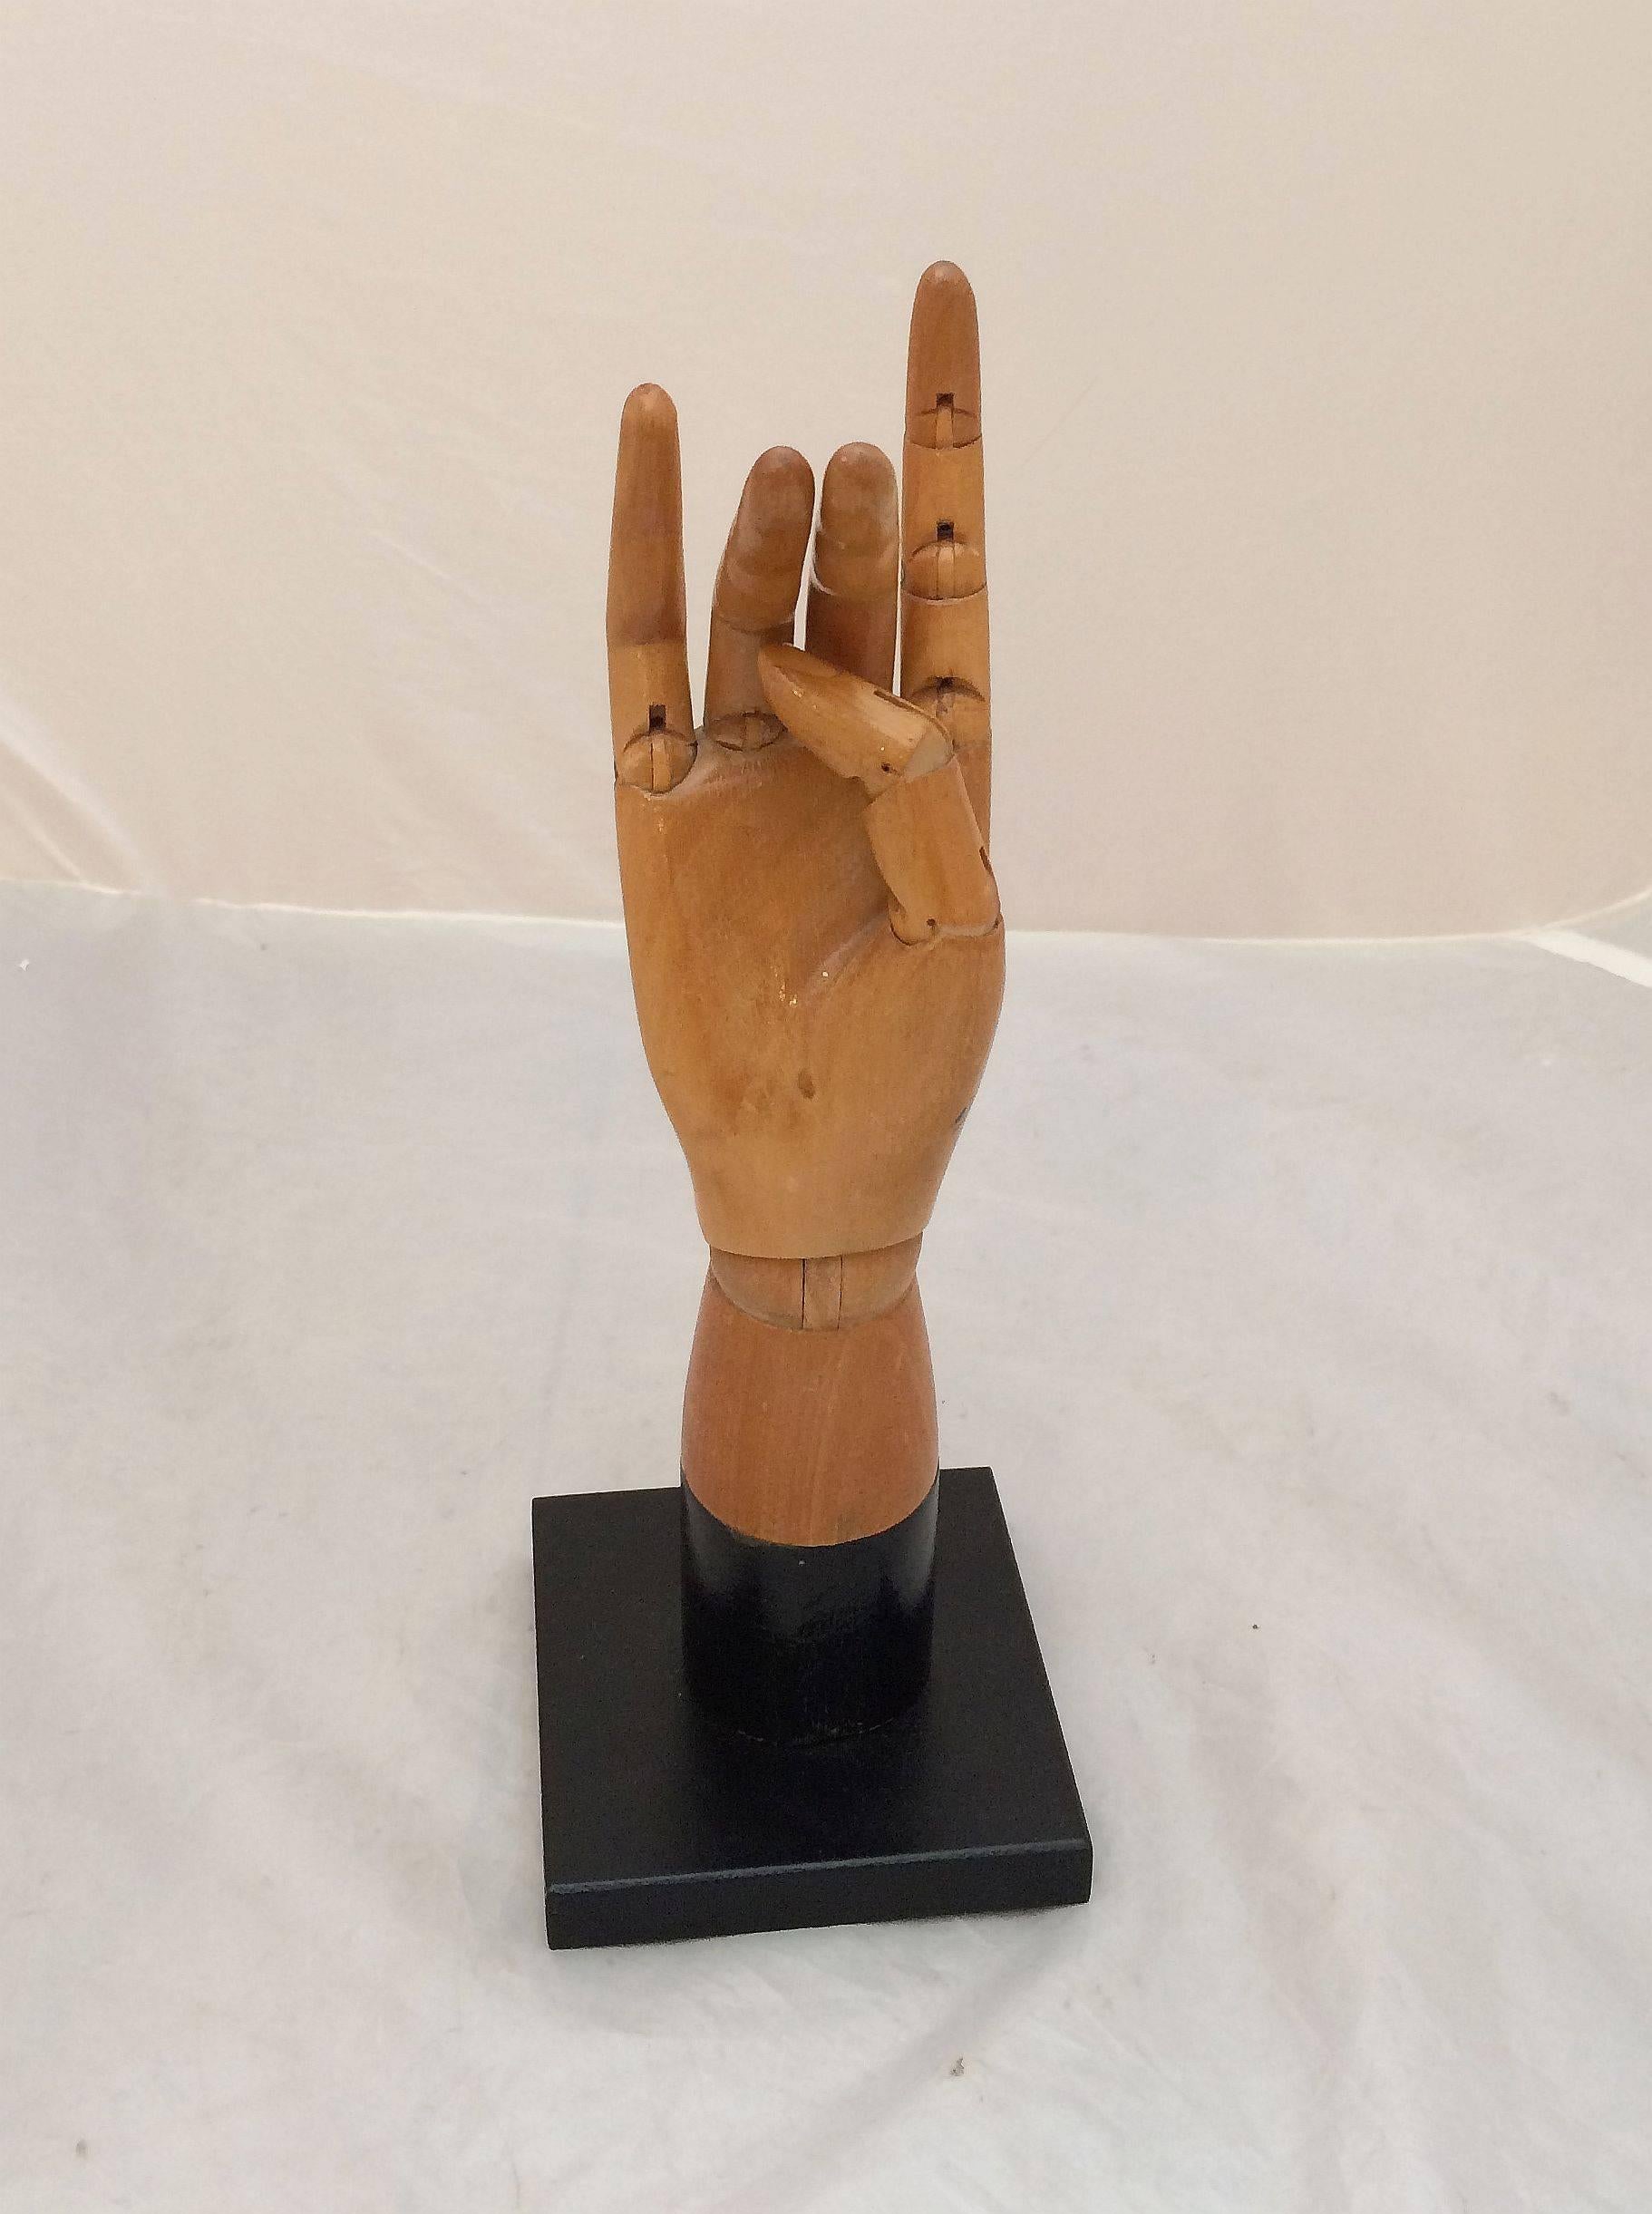 Articulated Model of Hand from England 1